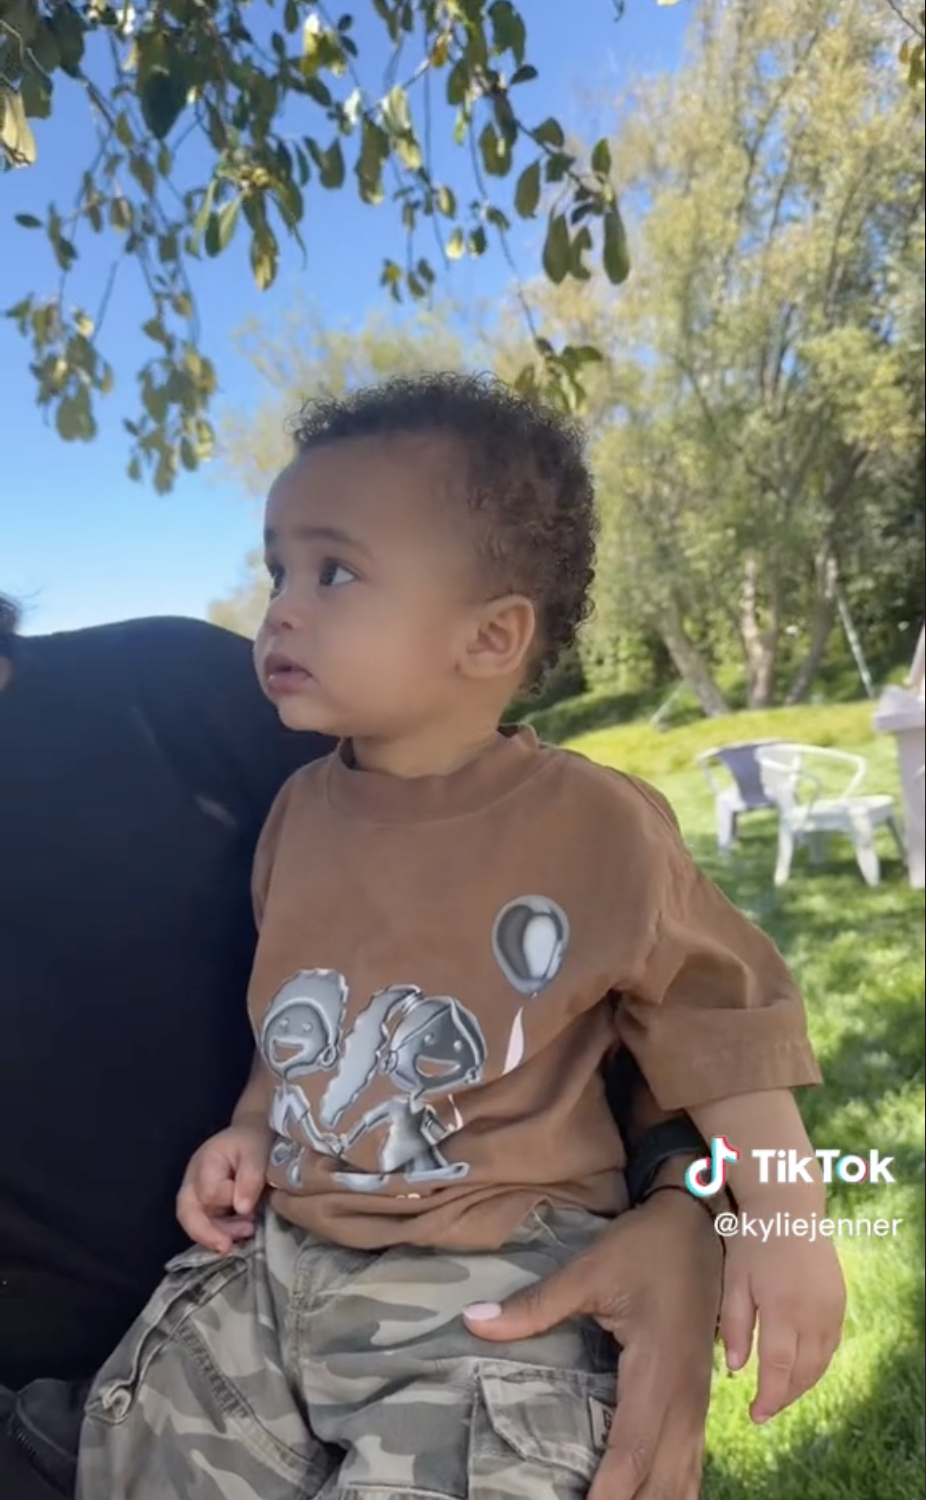 Aire at his cousin's 5th birthday party. (TikTok)